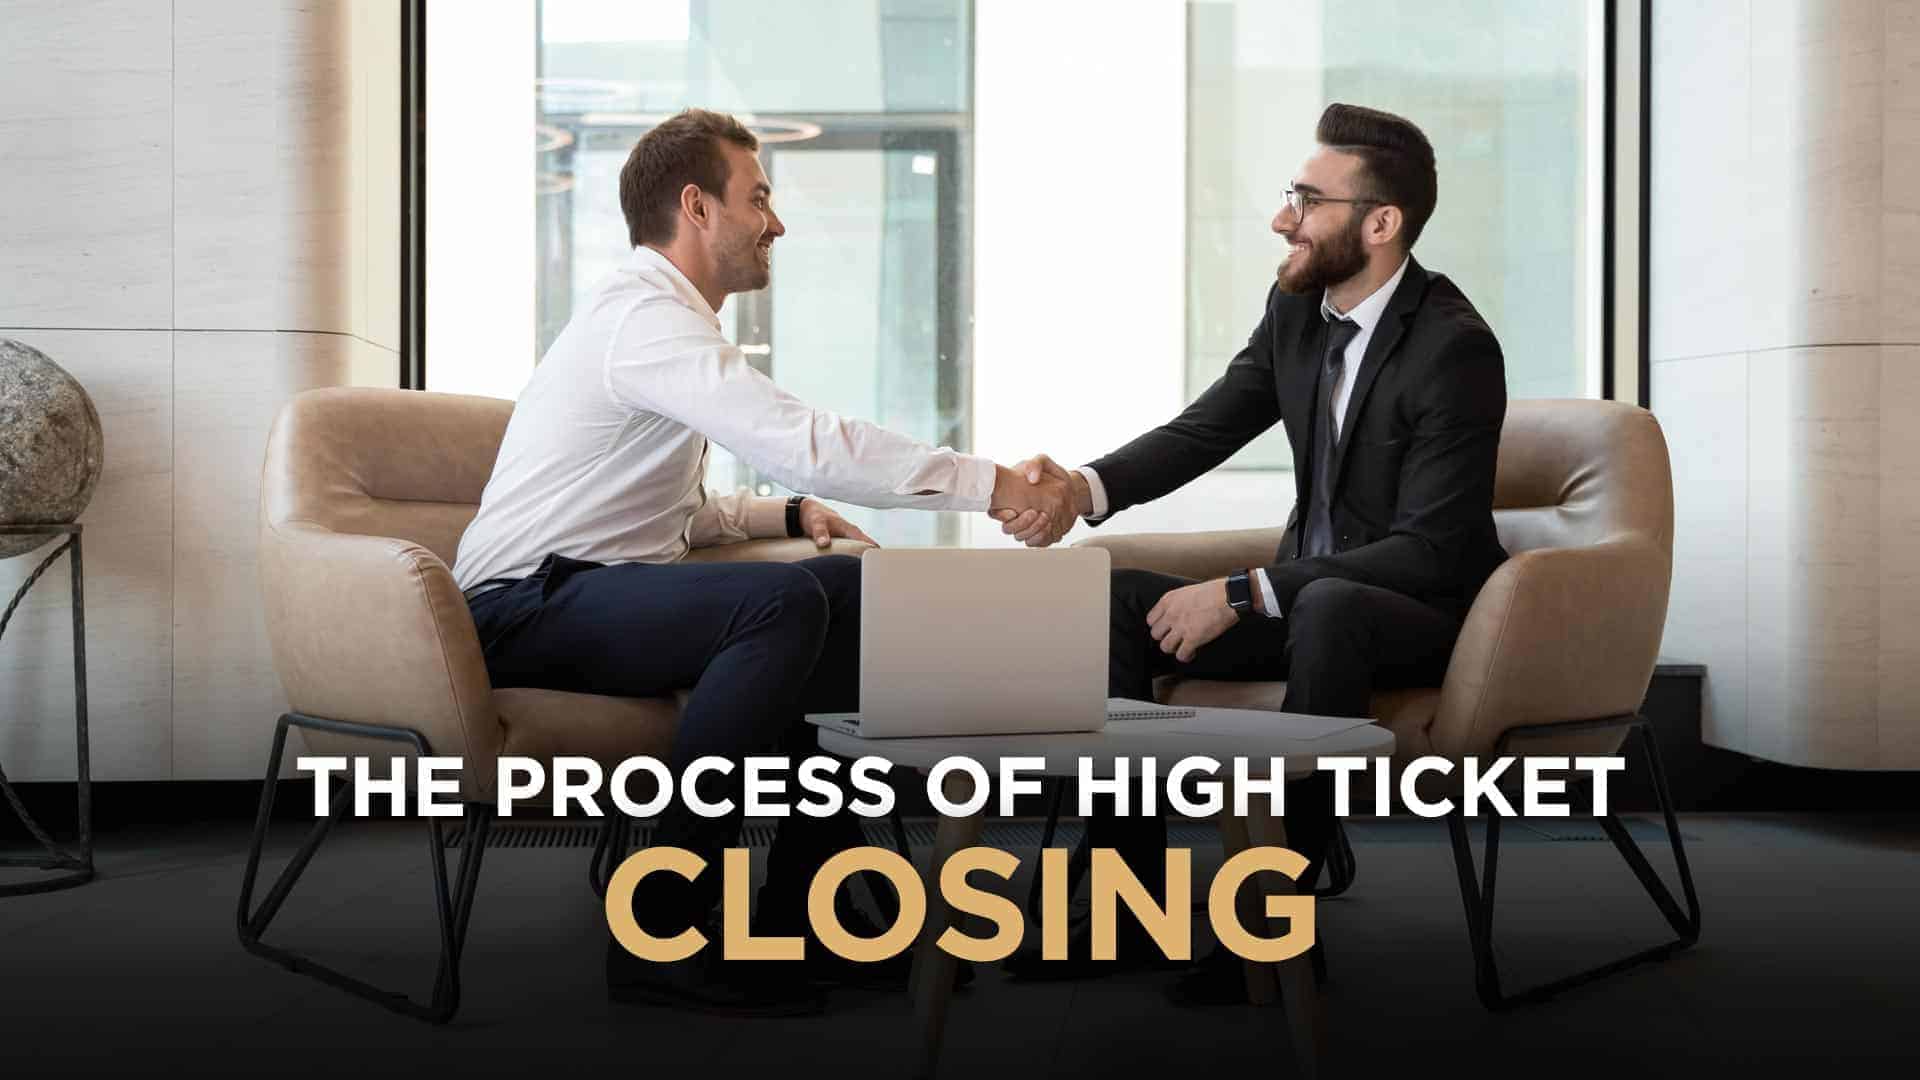 How To Use The Process Of High Ticket Closing